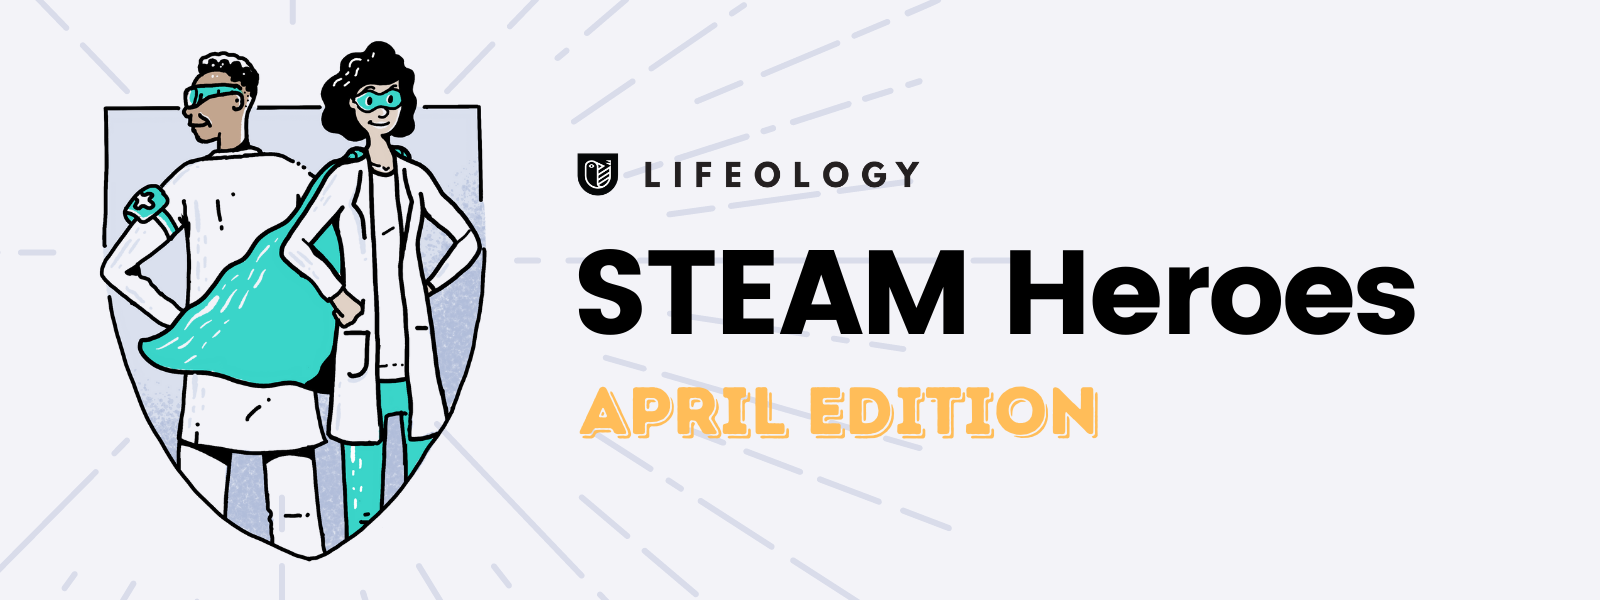 STEAN Heroes - April Edition